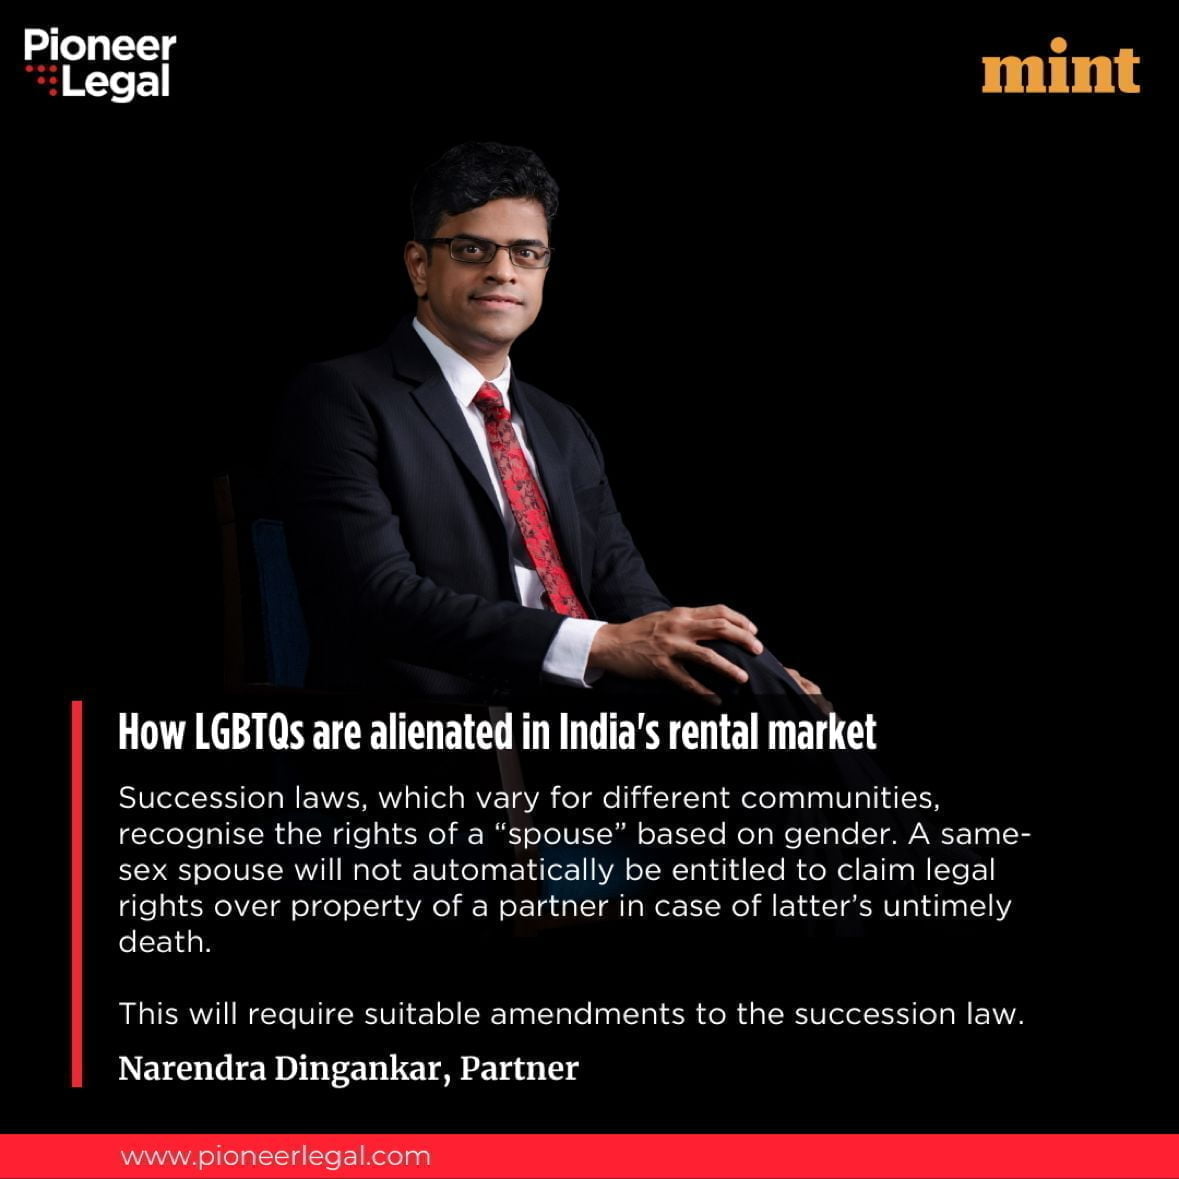 Pioneer Legal - How LGBTQ's are alienated in India's rental market